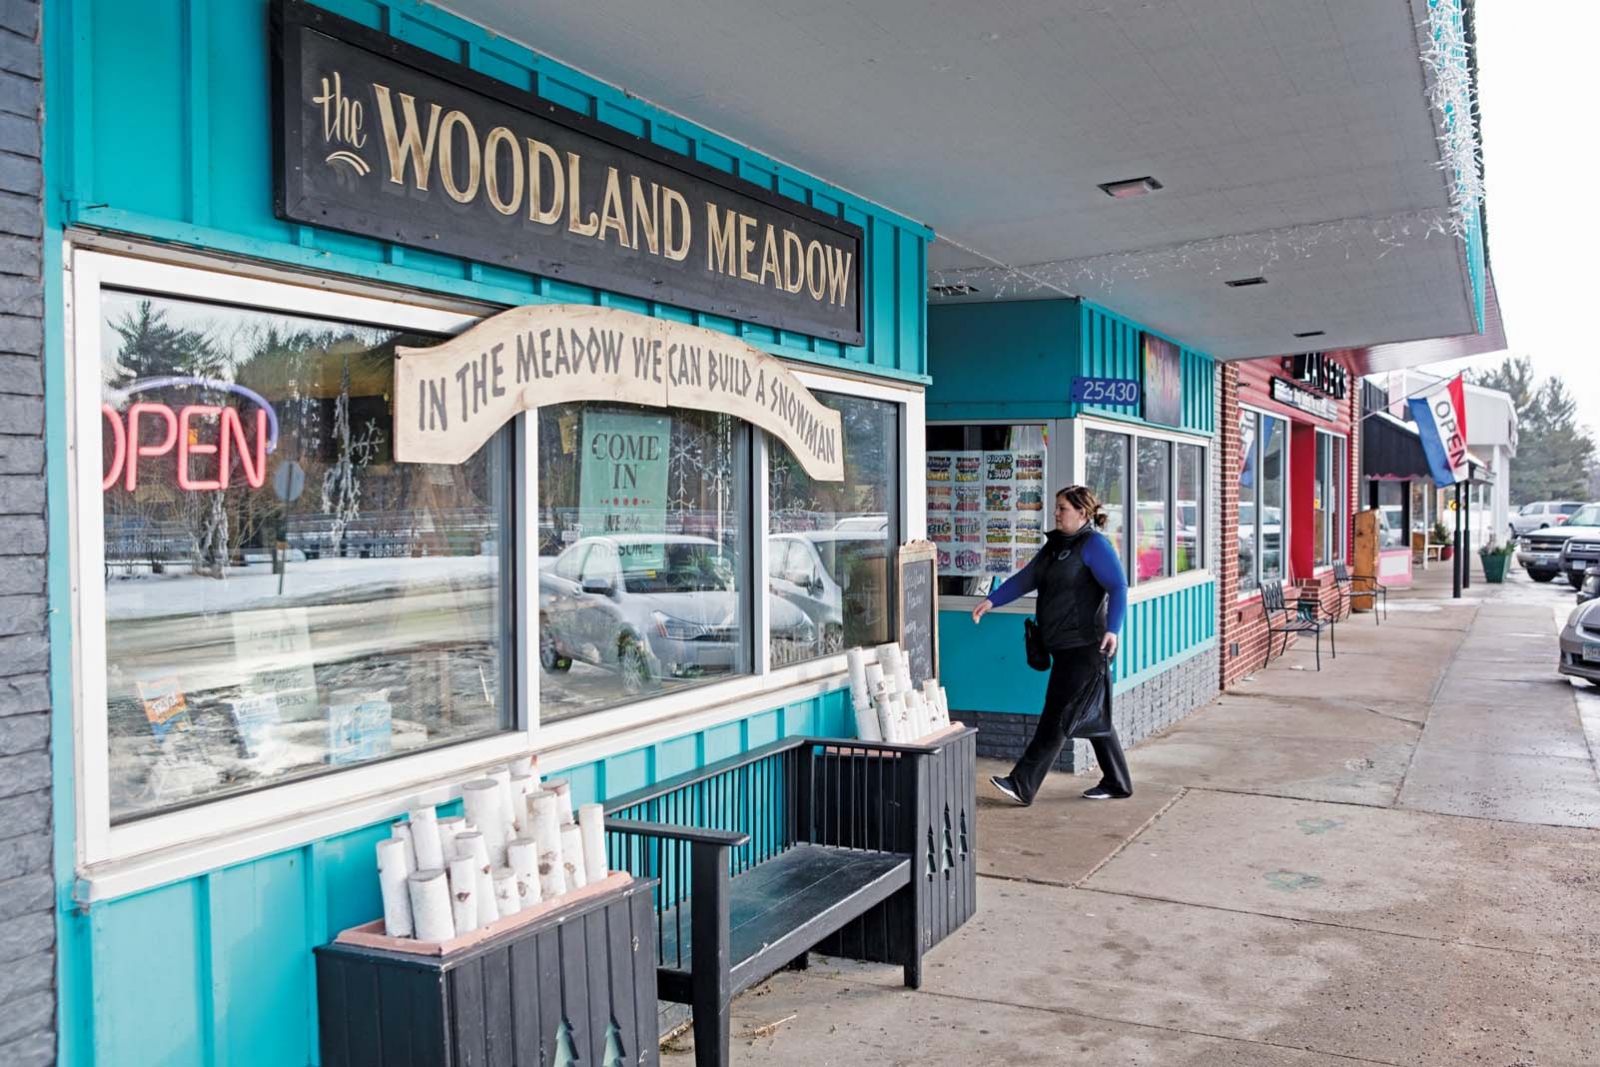 The exterior of Woodland Meadow gift shop.